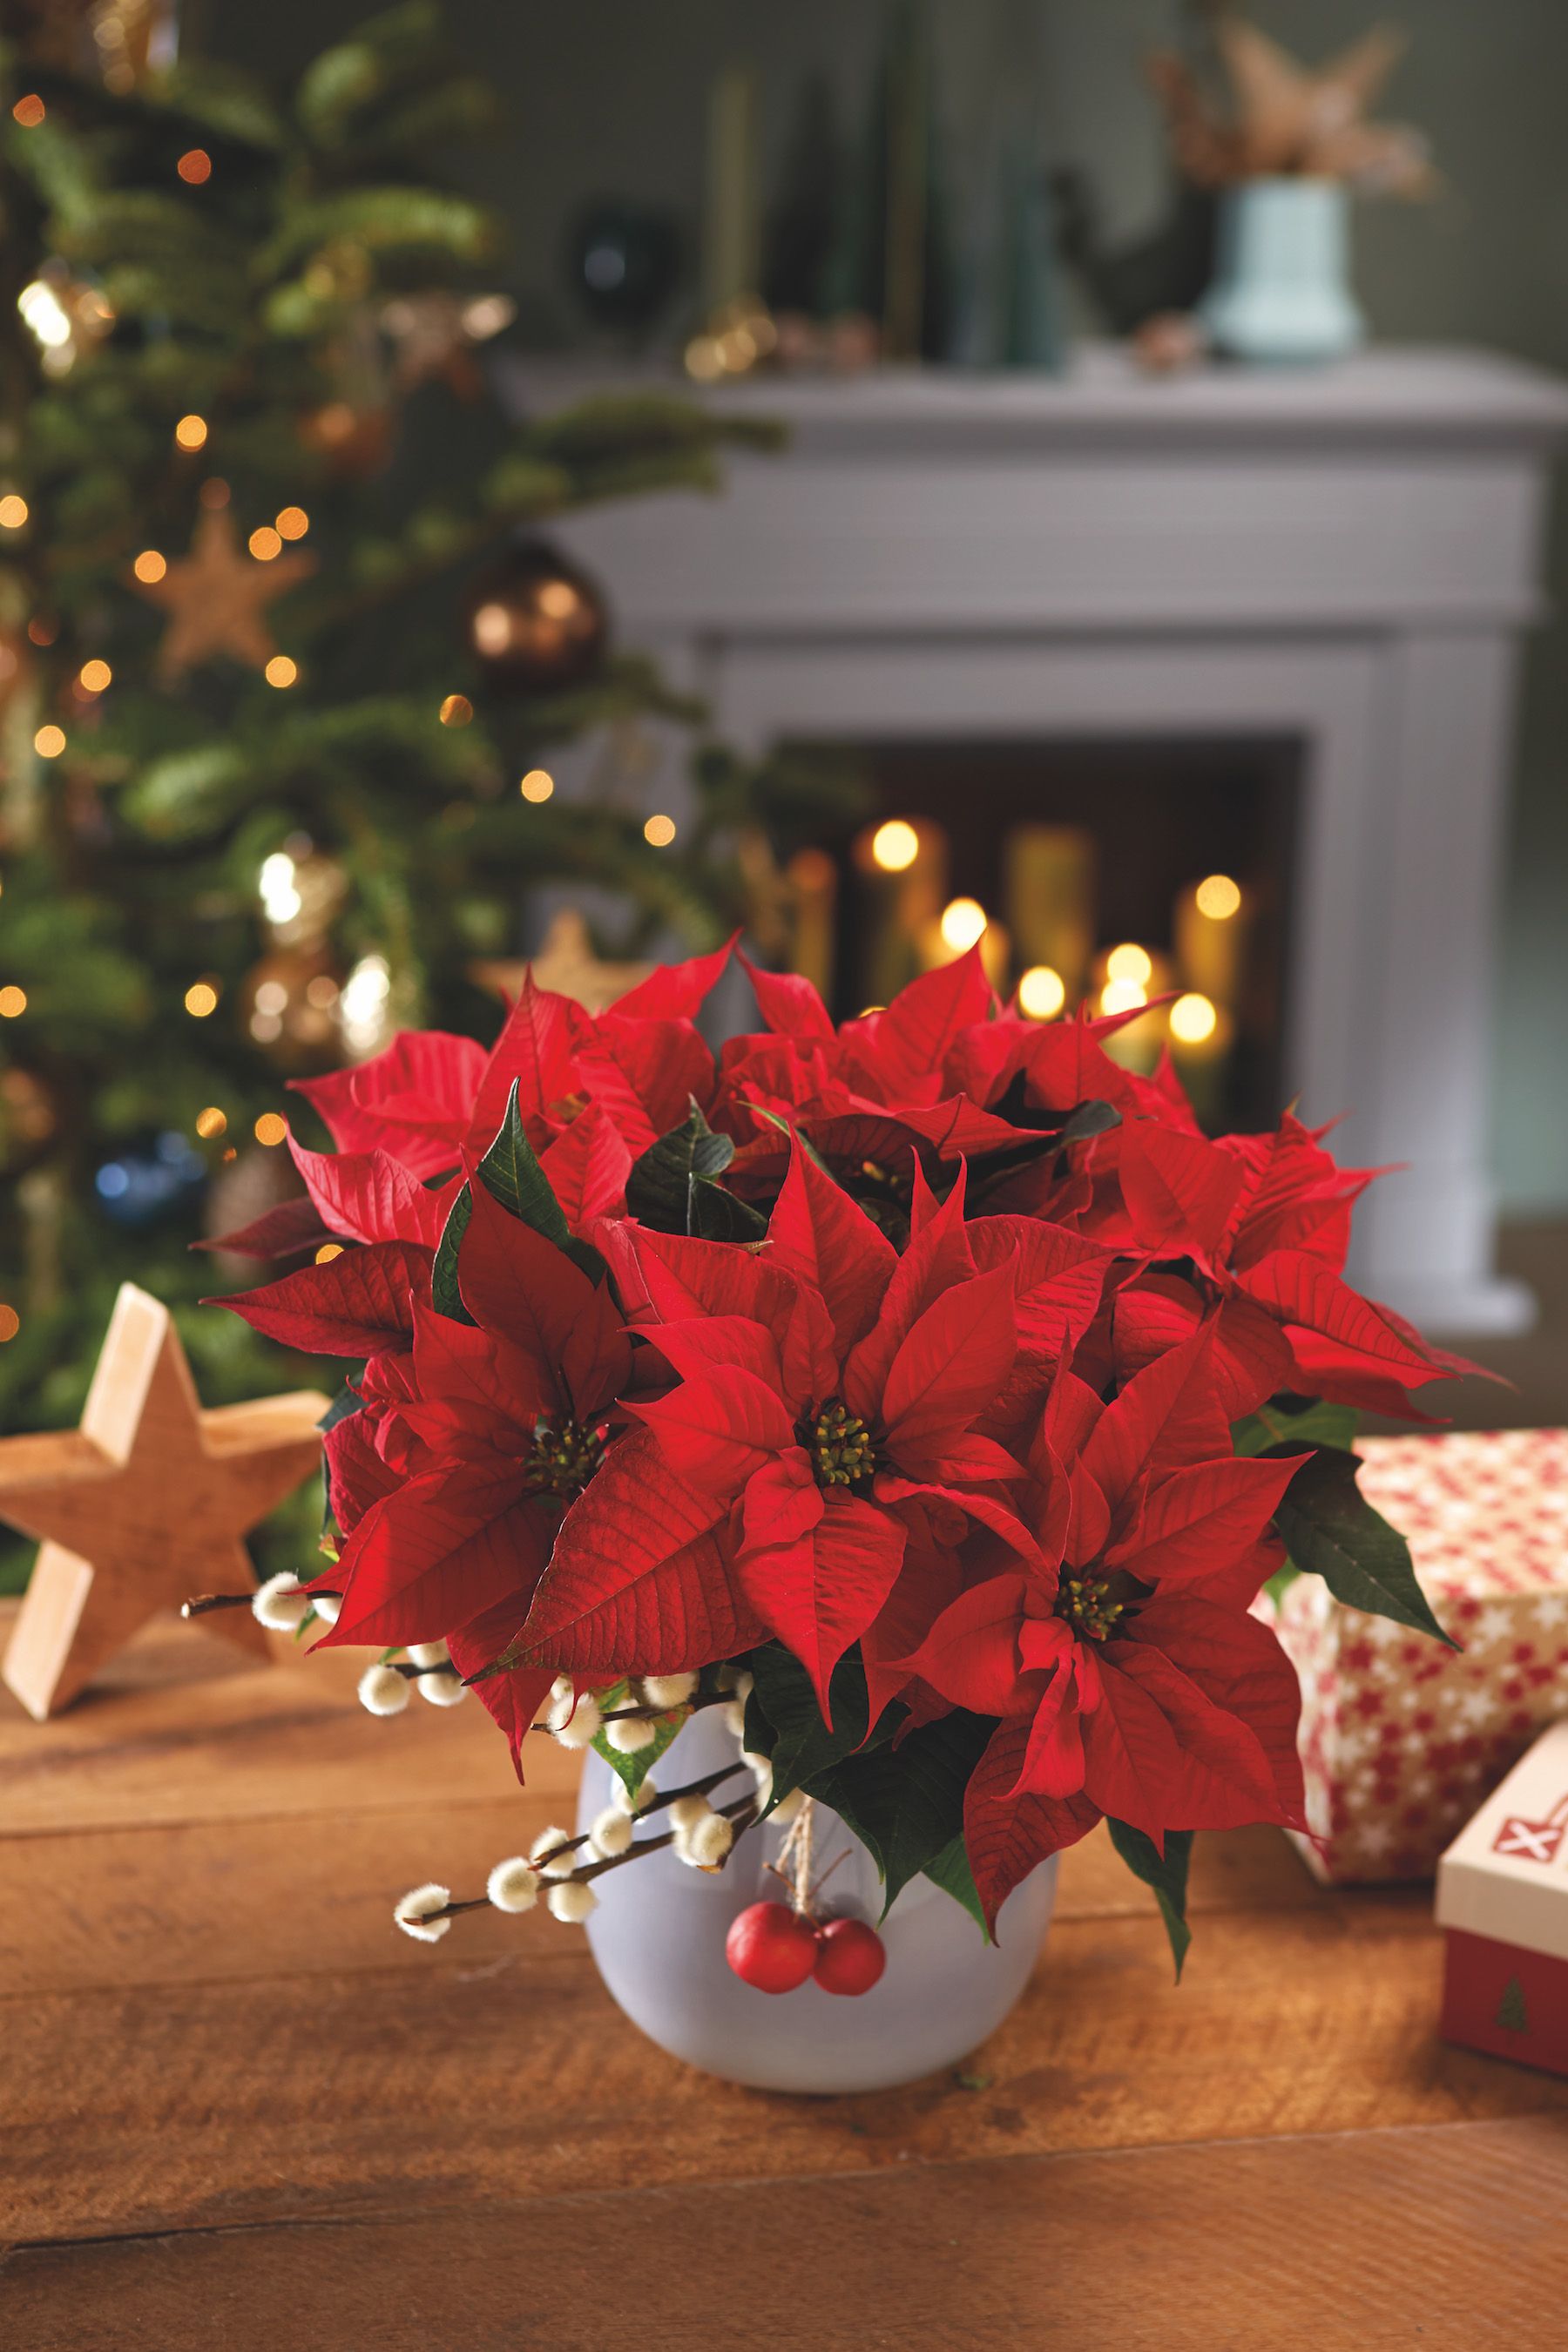 10 Best Christmas Plants to Decorate With | Country Living